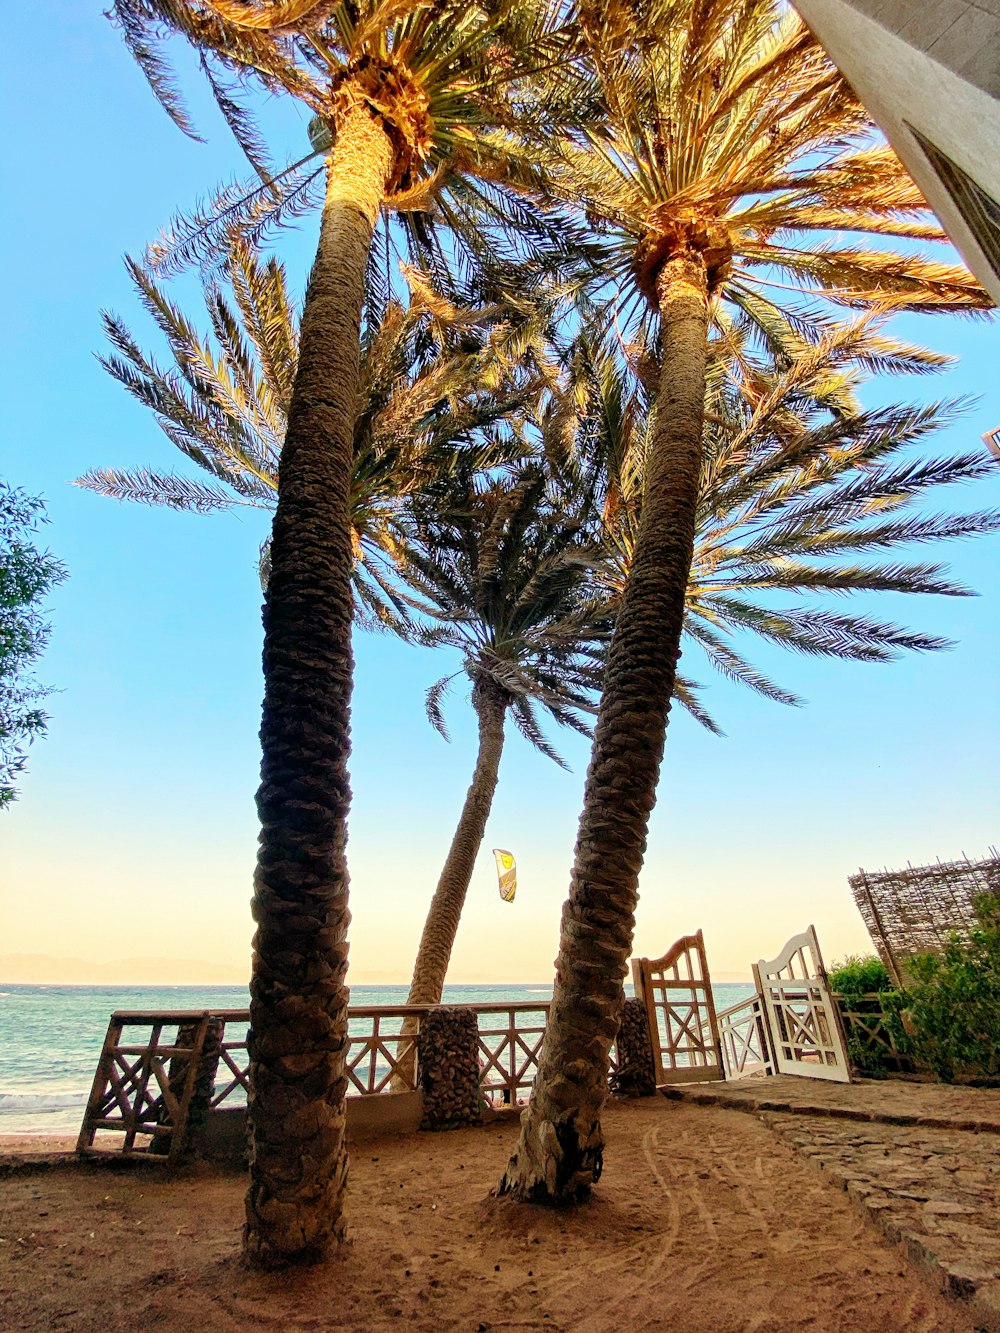 palm tree near body of water during daytime